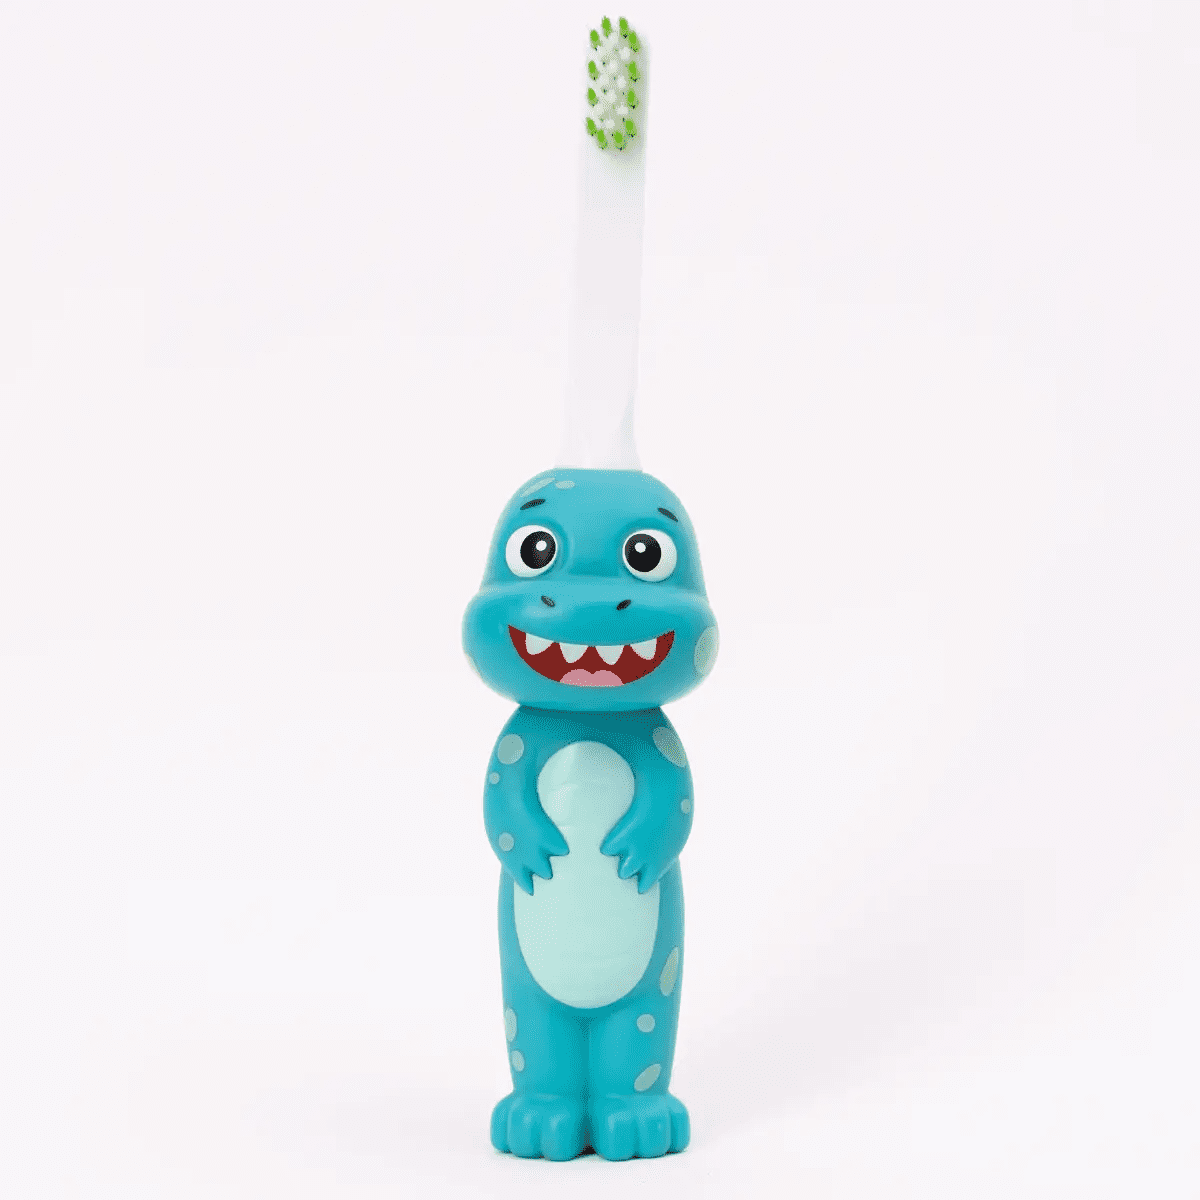 A blue Brushy the Brushasaurus toothbrush with a dinosaur